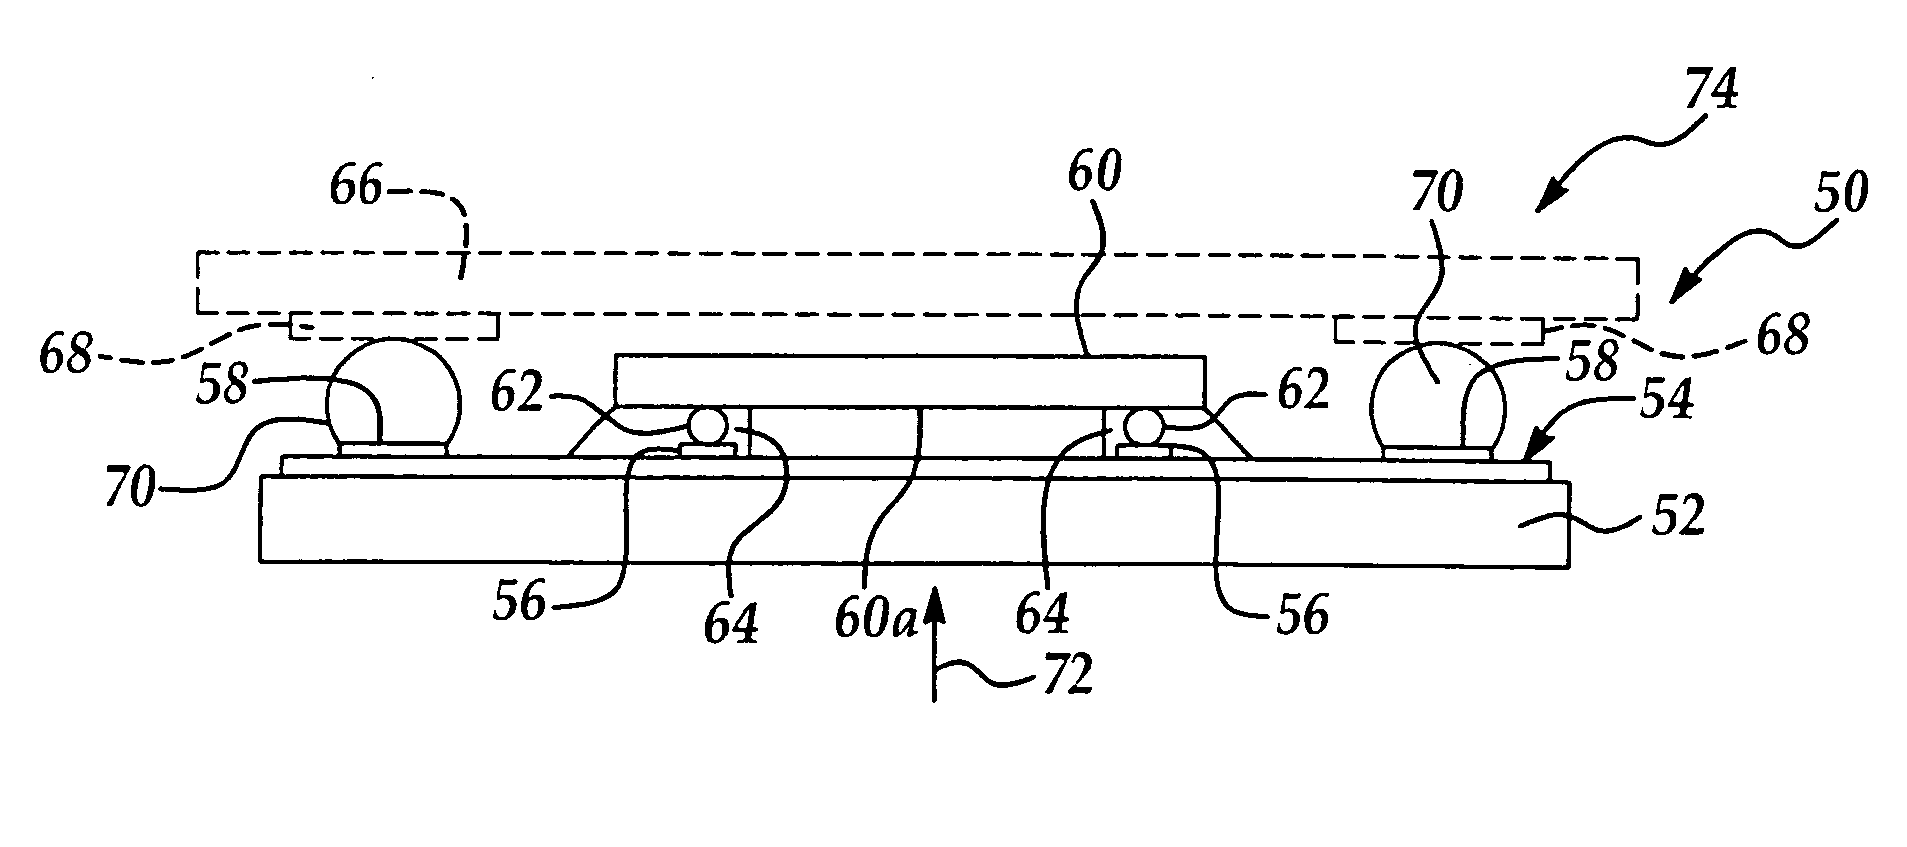 Image sensor packaging structure and method